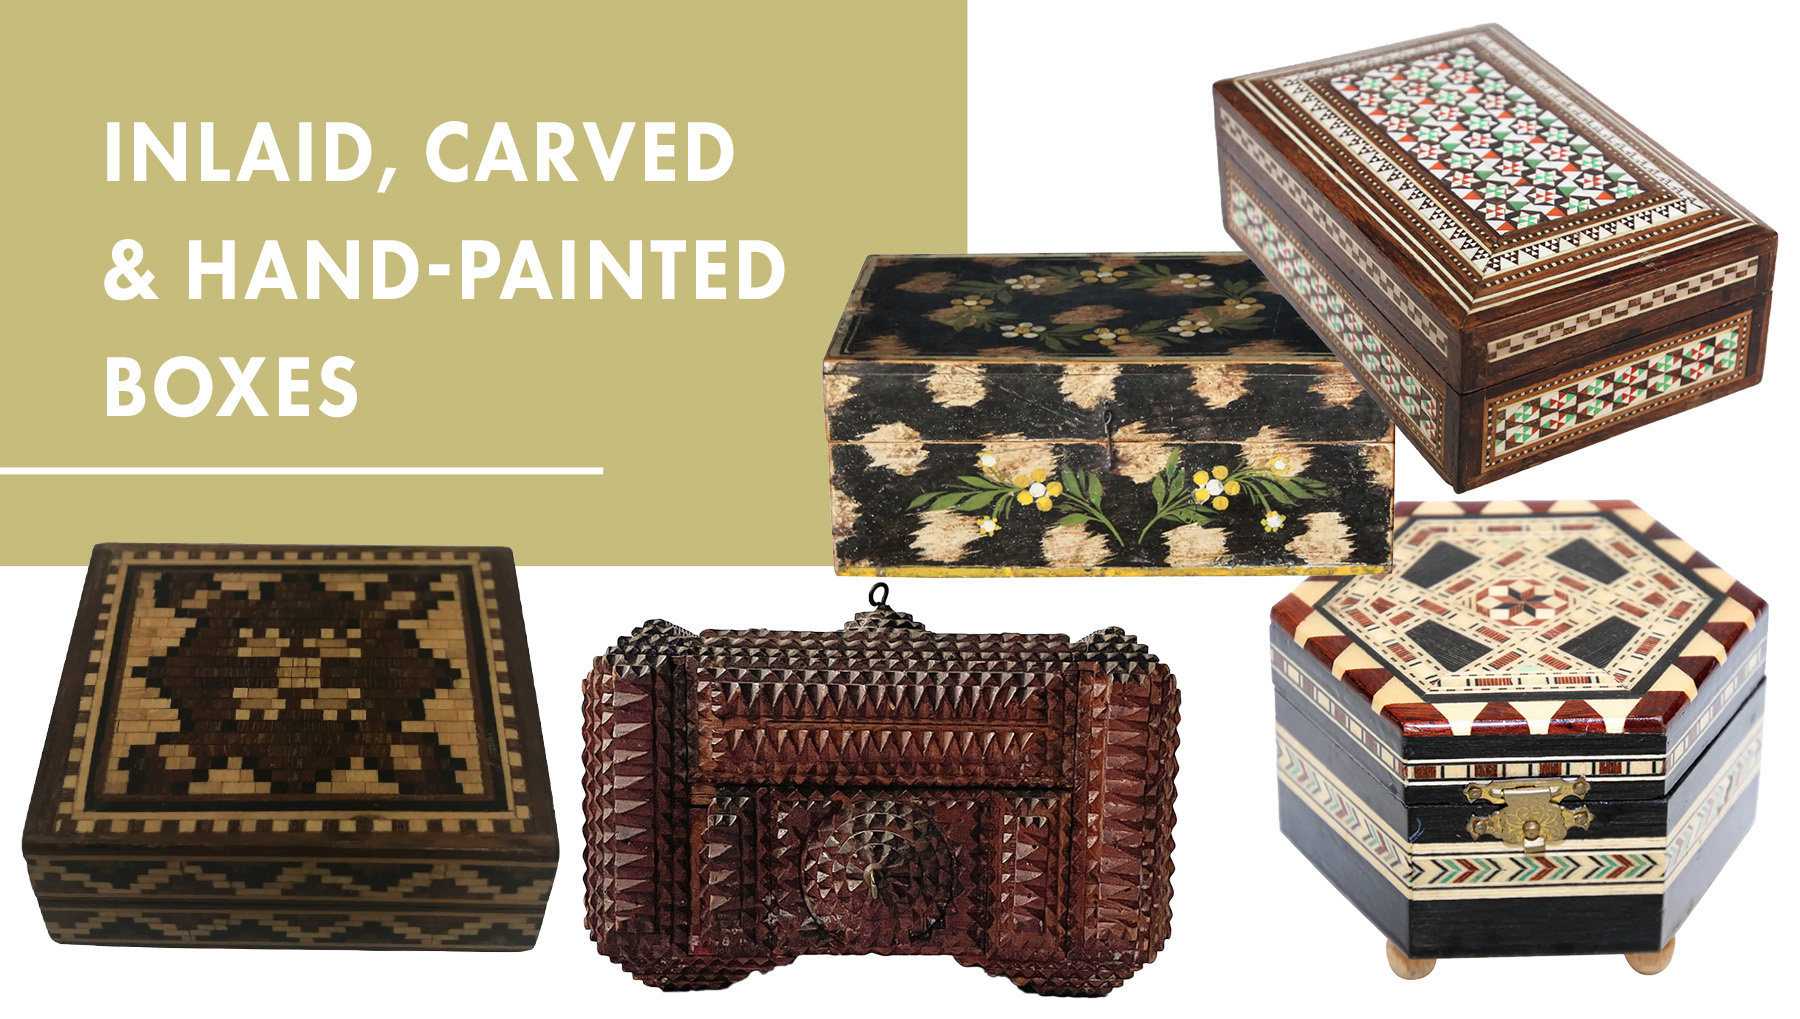 Inlaid, carved & hand-painted boxes